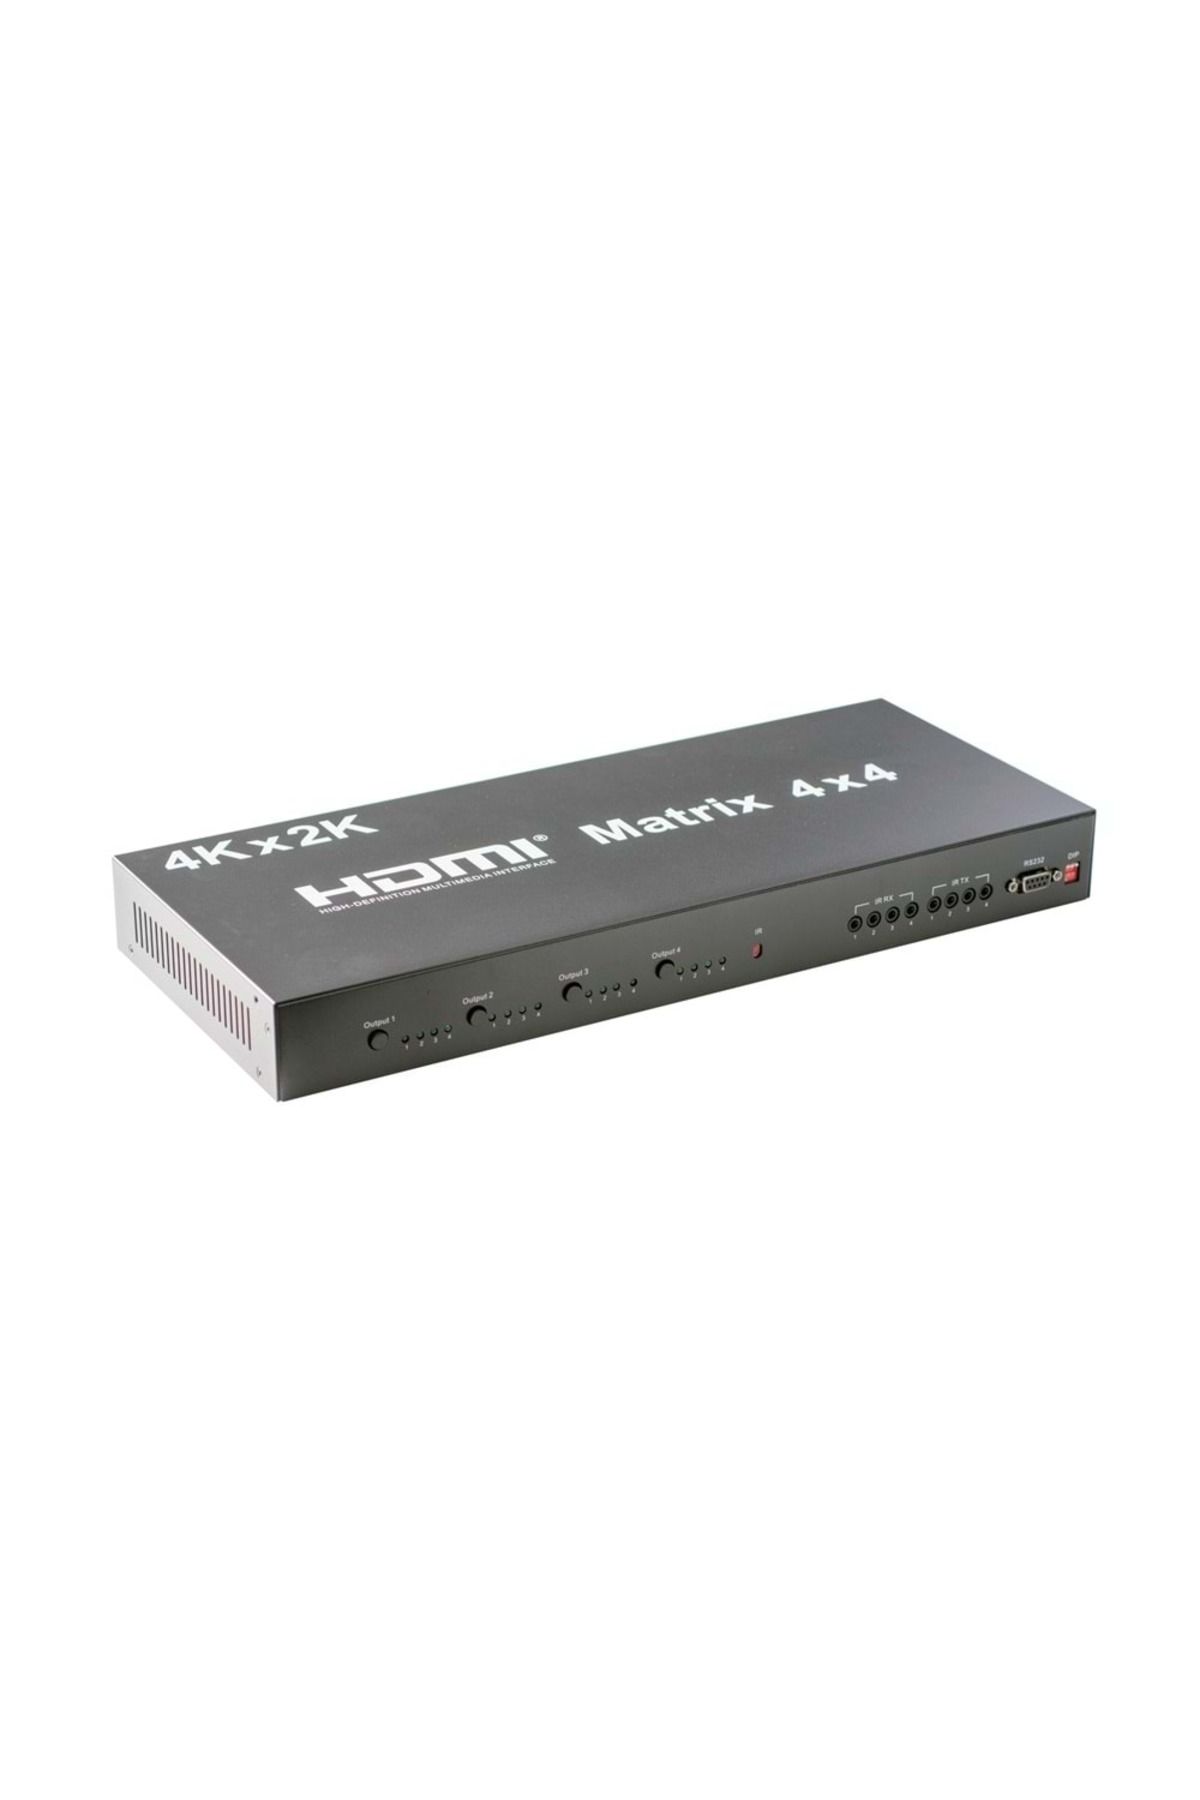 upTech HDMI 4x4 Matrix Switch with Ultra HD 4K support